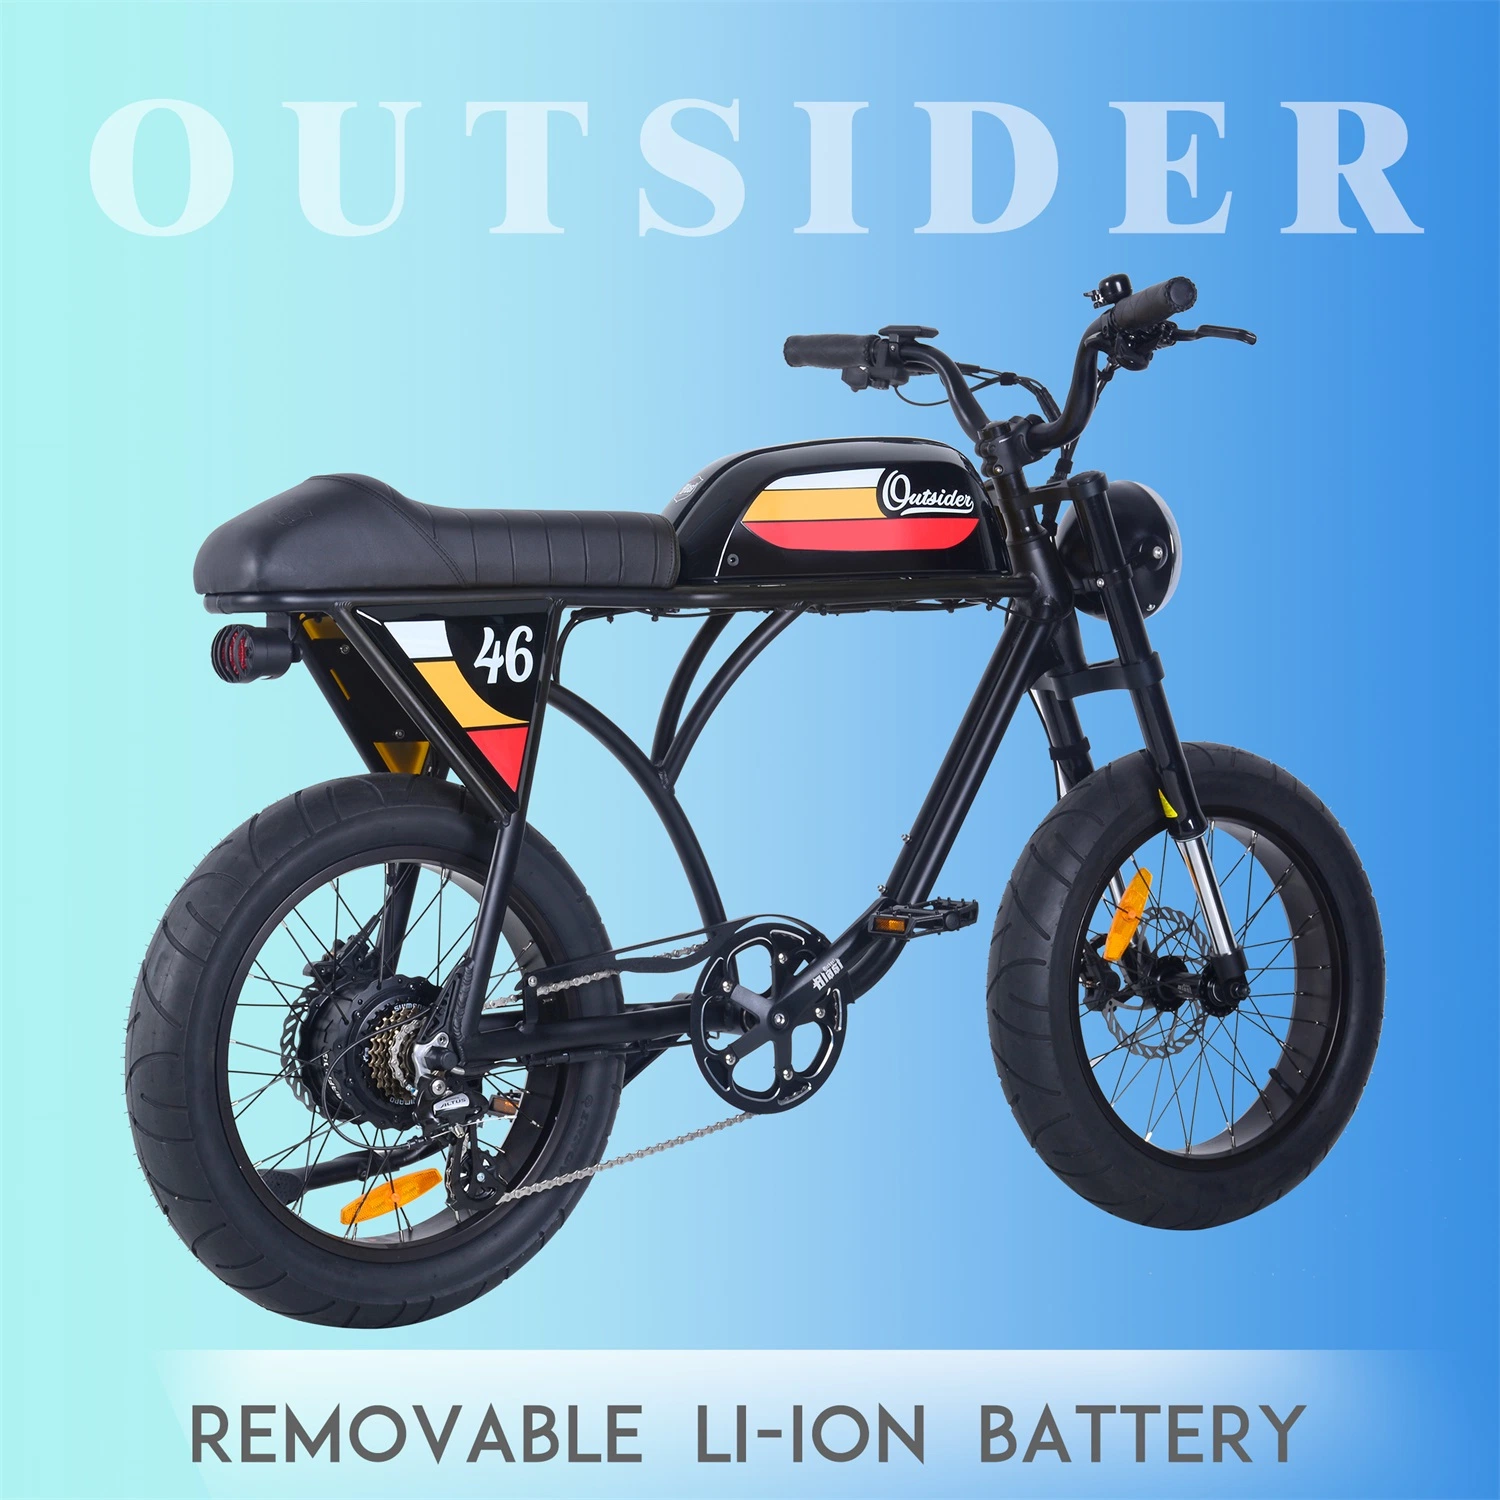 60 Km Range Per Charge Electric Bike and Aluminium Frame 2 Wheel Electric Motorcycle E Scooter